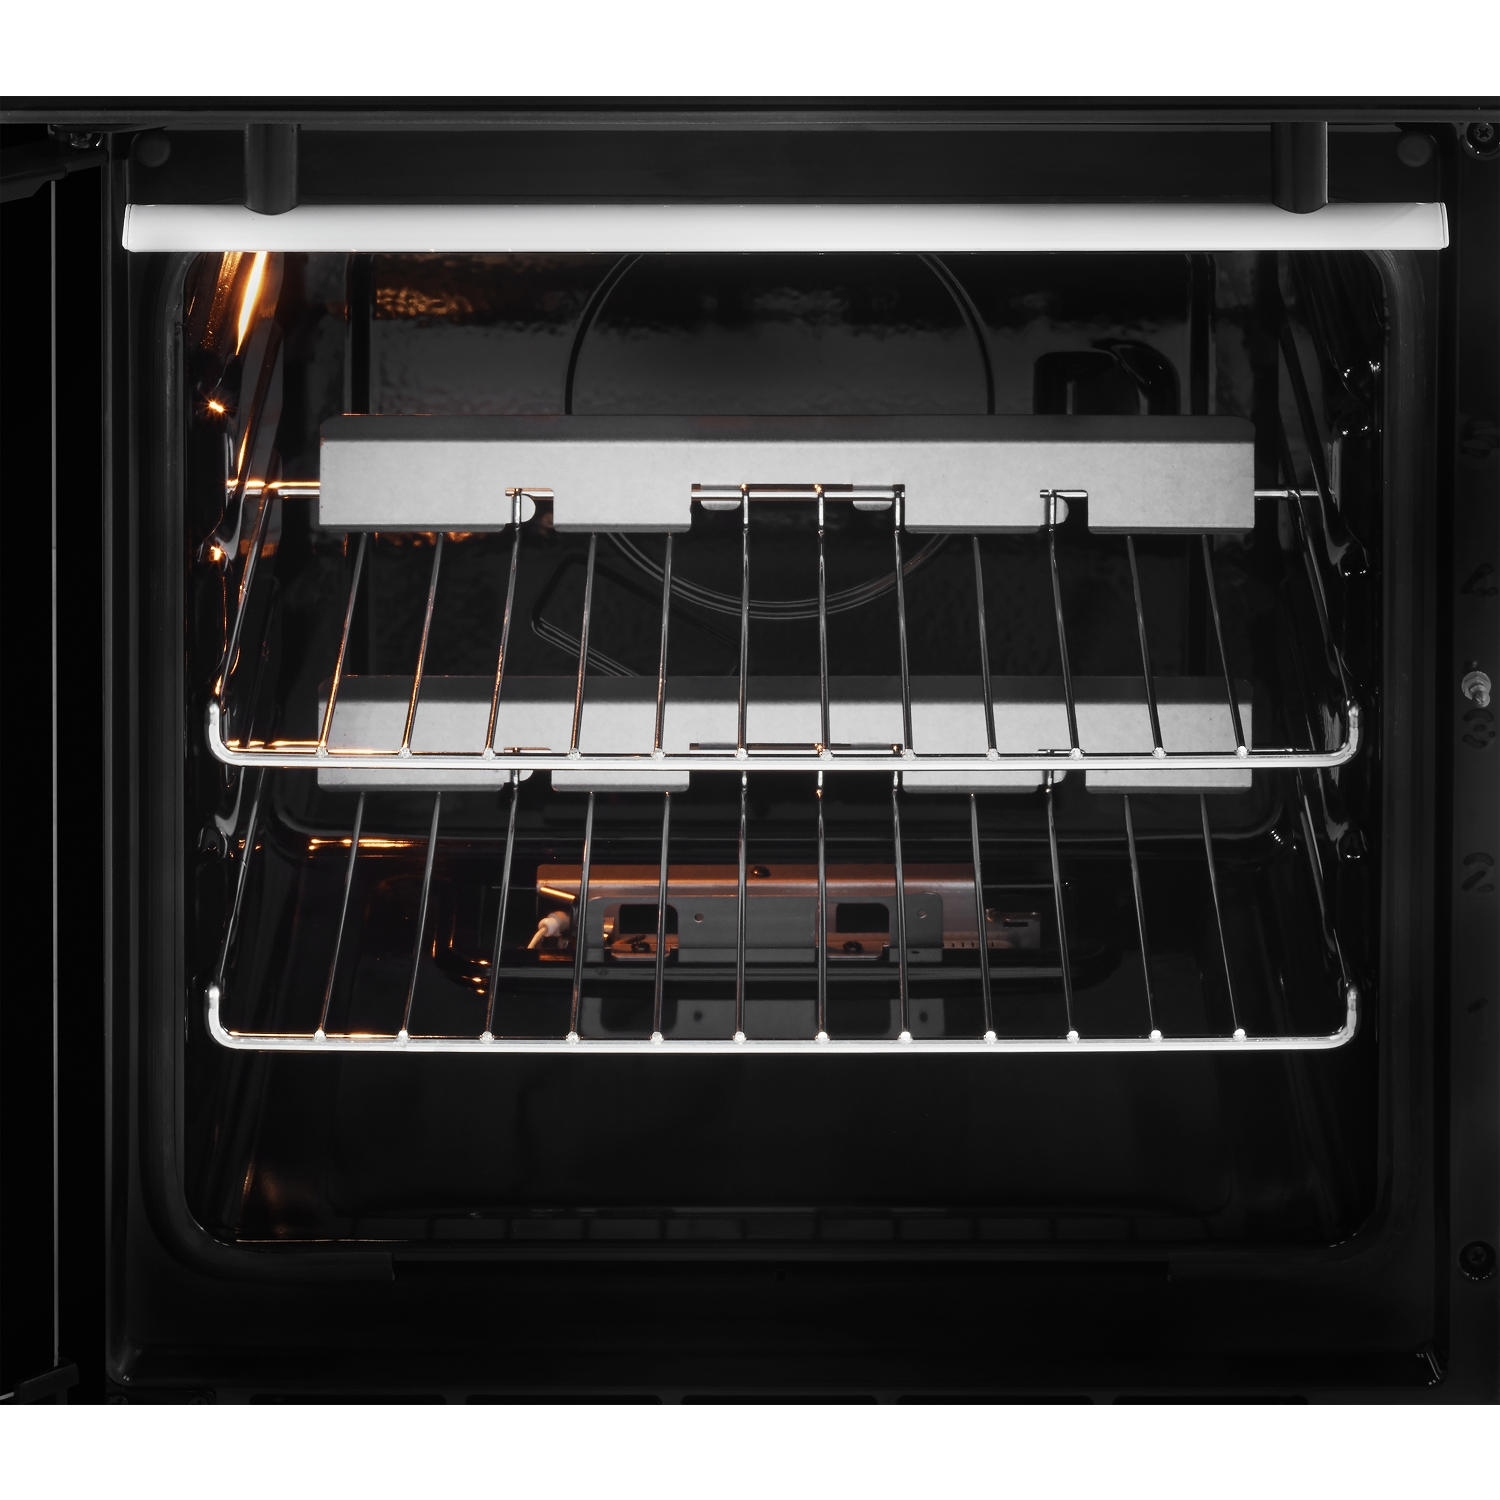 Beko 50cm Gas Cooker with Glass lid  - 2